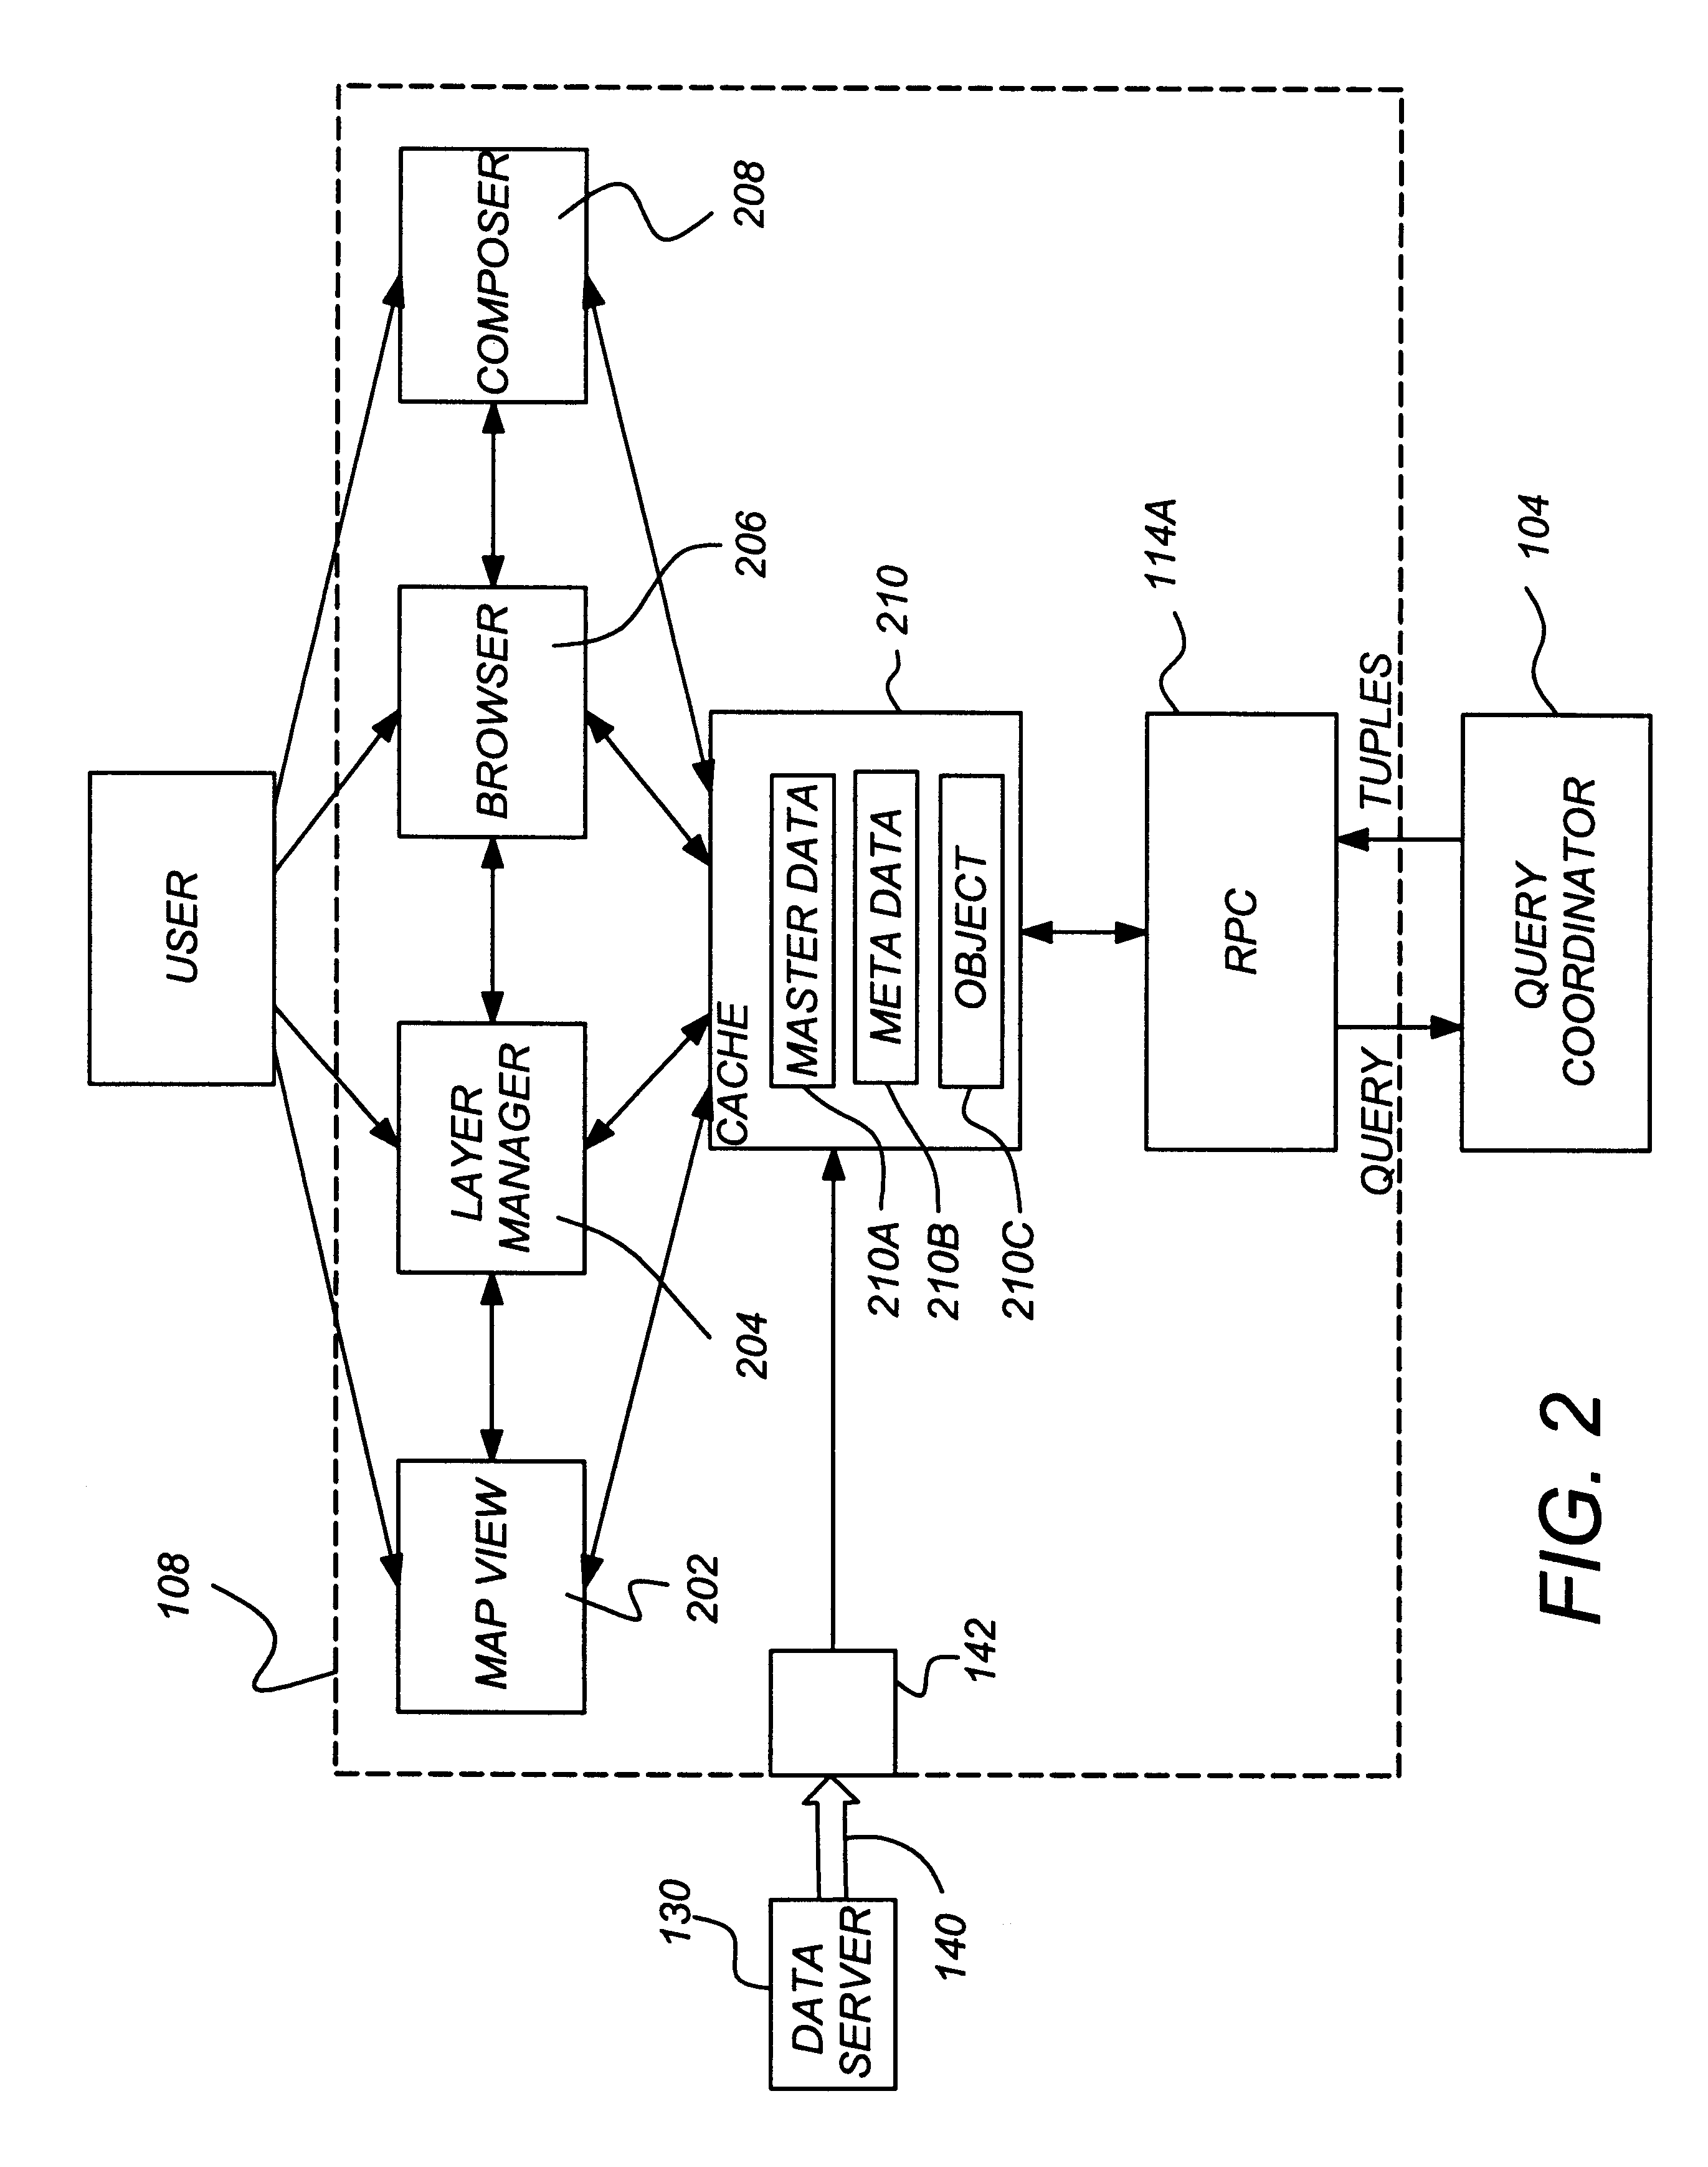 Method and apparatus for evaluating index predicates on complex data types using virtual indexed streams